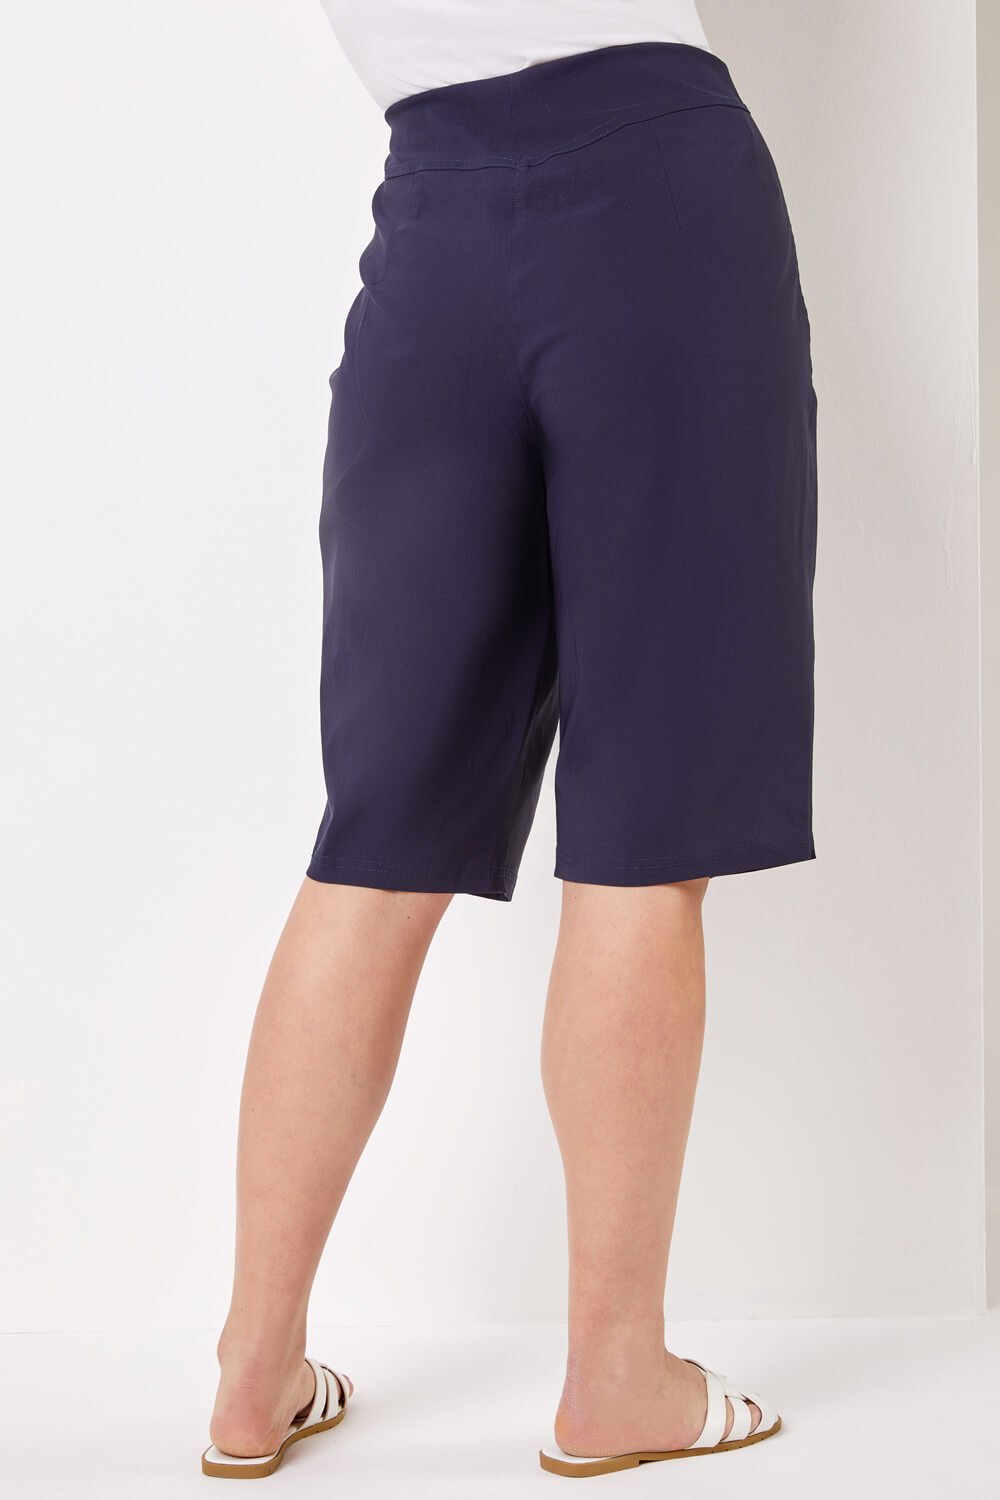 Navy  Curve Knee Length Stretch Shorts, Image 2 of 4